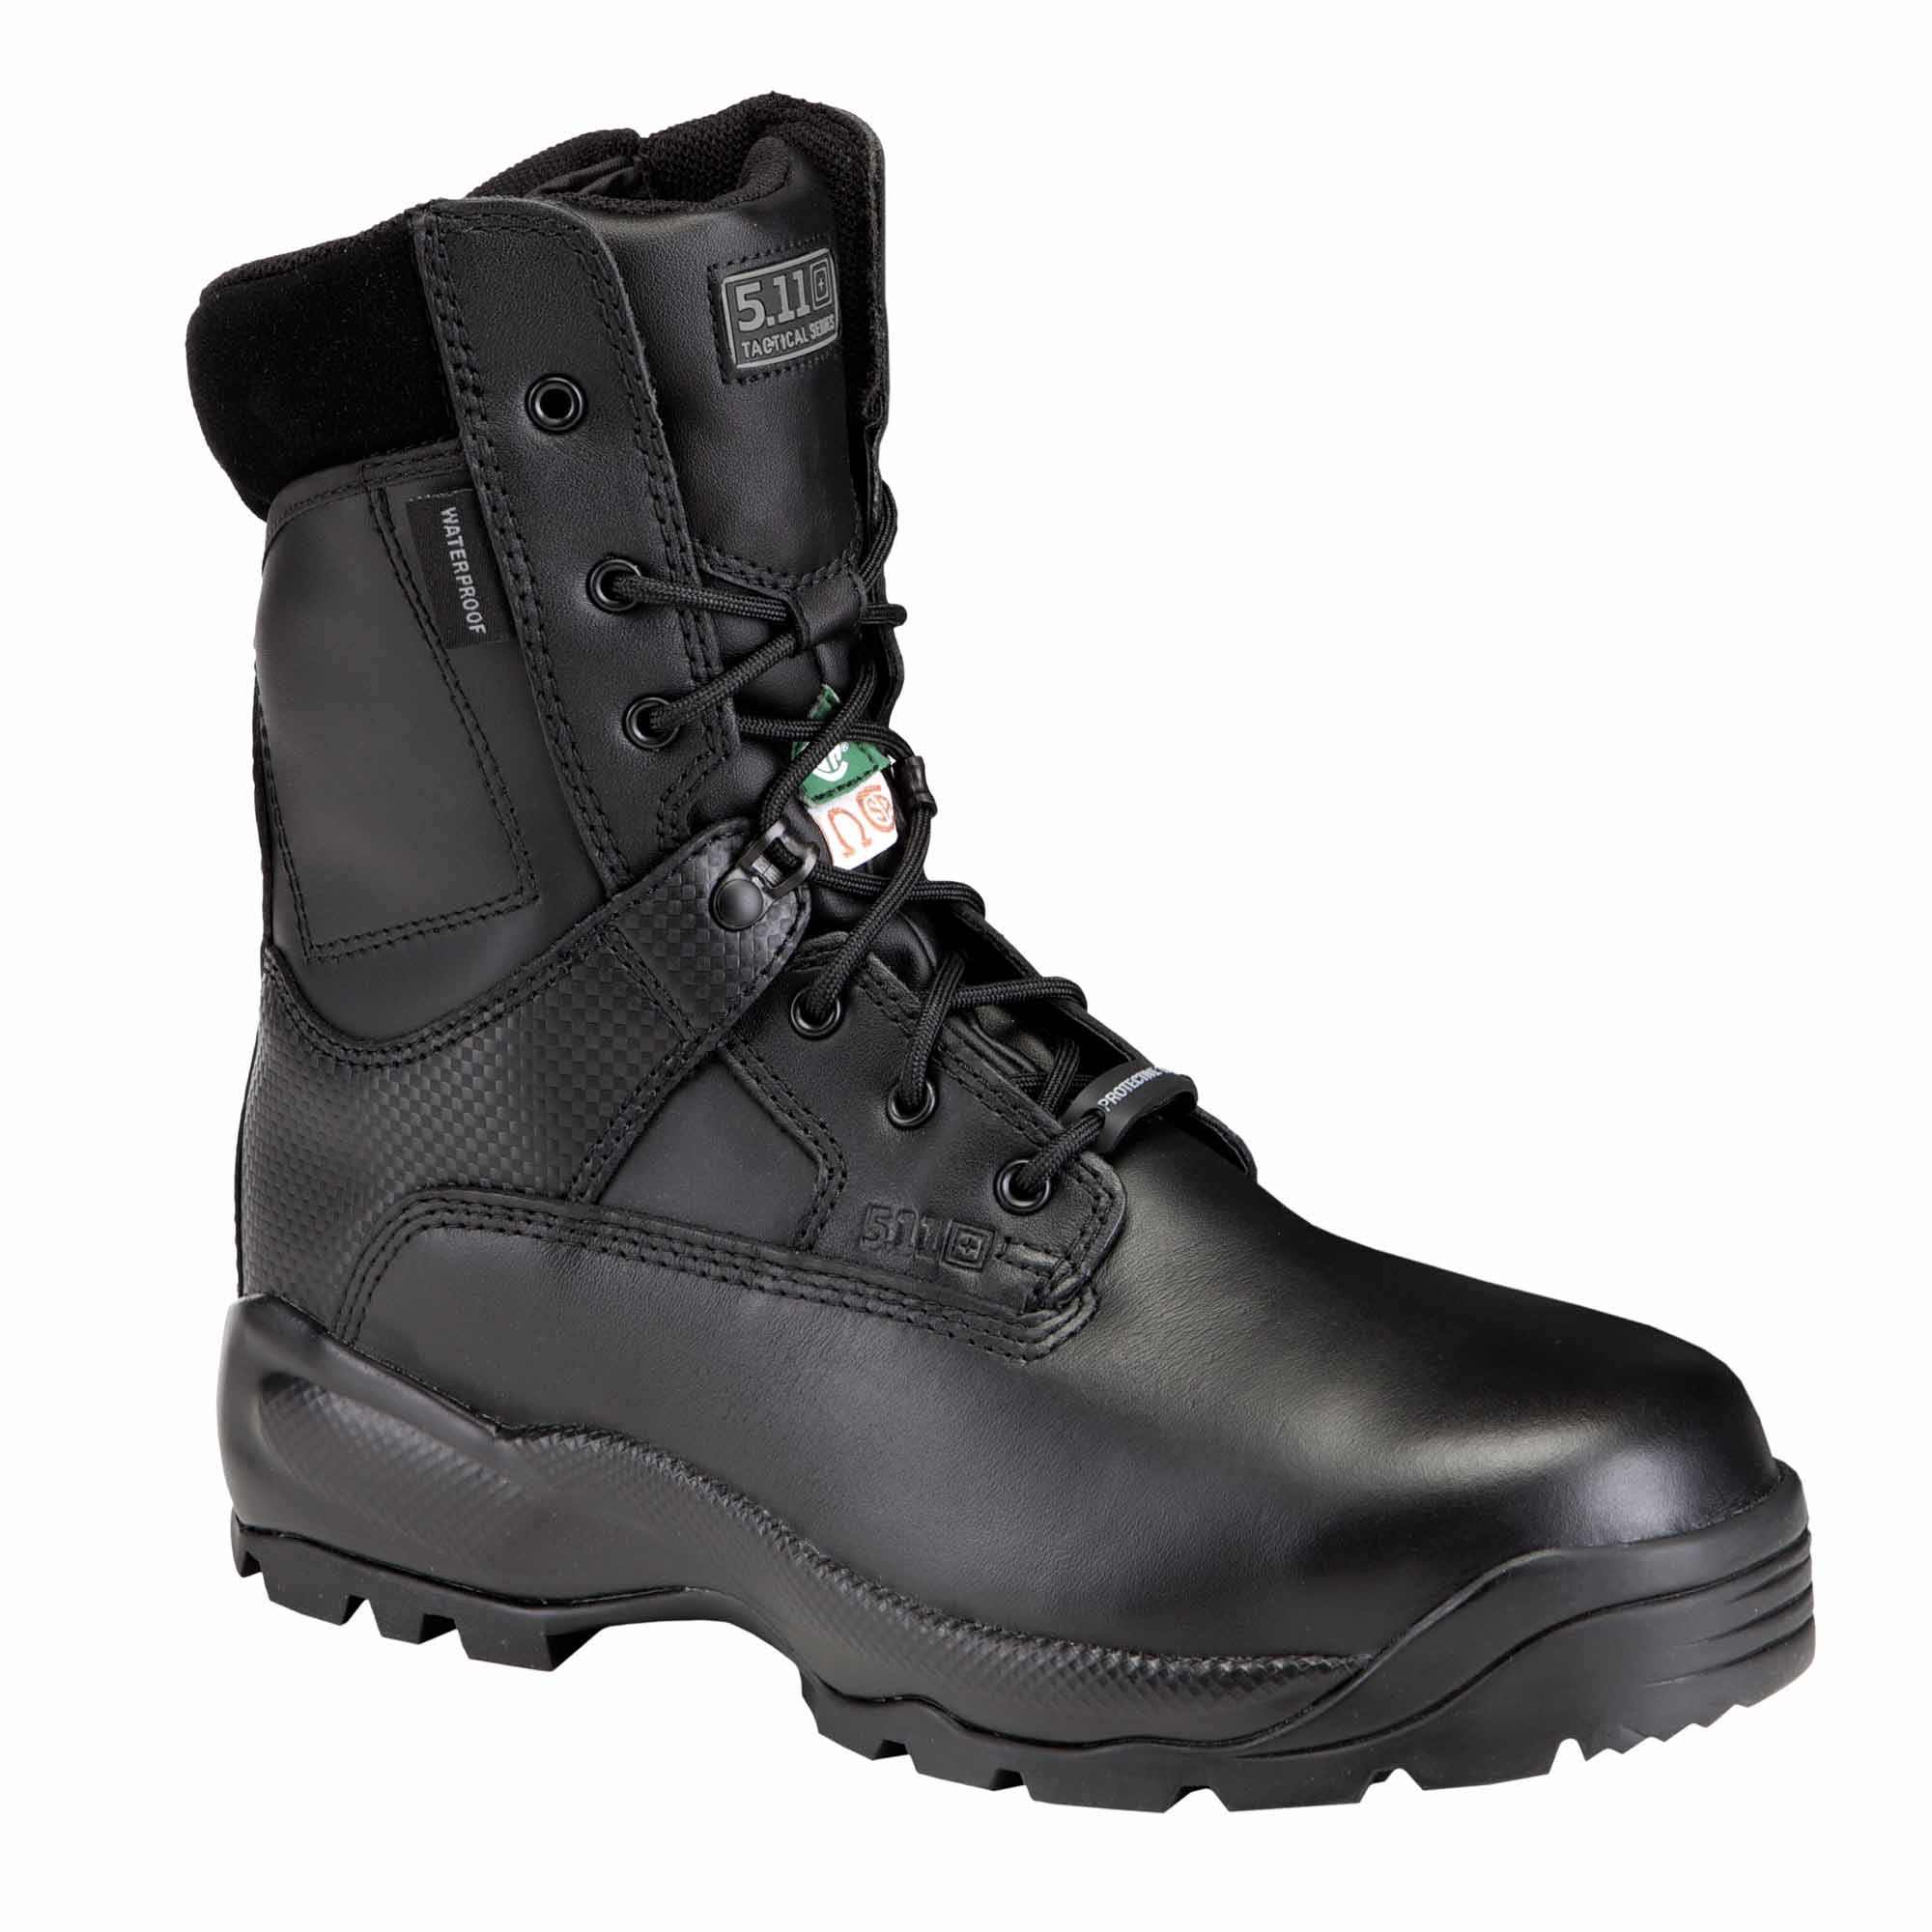 5.11 work boots